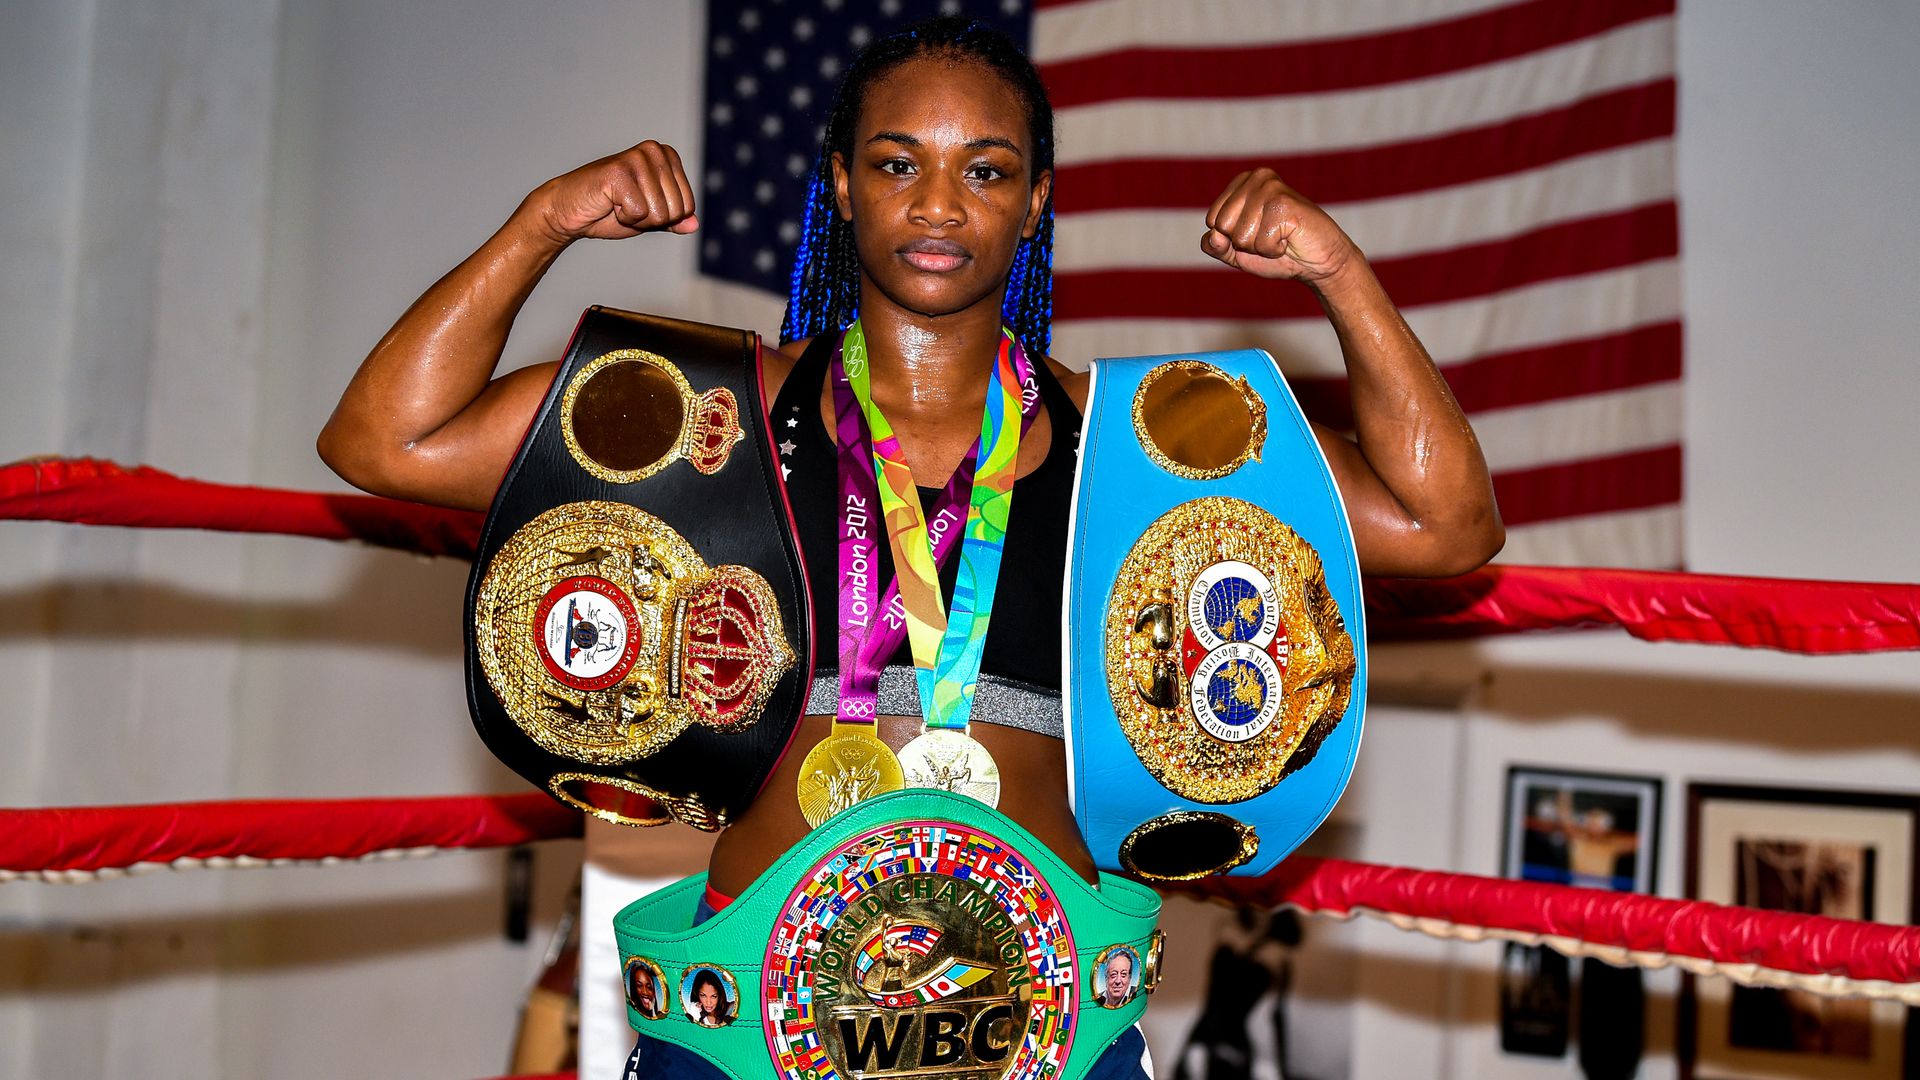 claressa shields posing with belts and medals